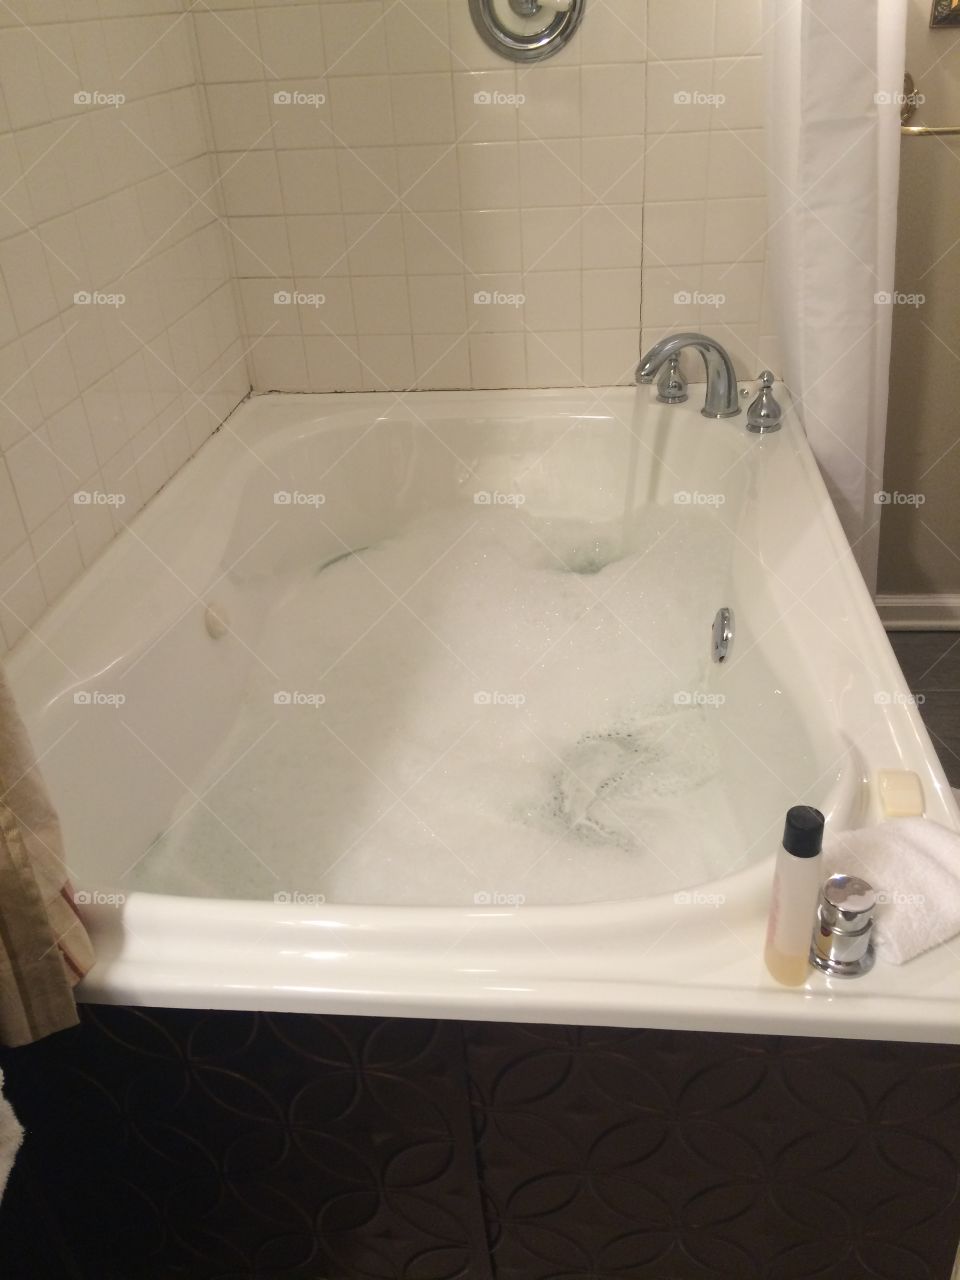 A bubble bath and a jetted tub is a welcome treat for any road weary traveler stopping into a bed-and-breakfast.